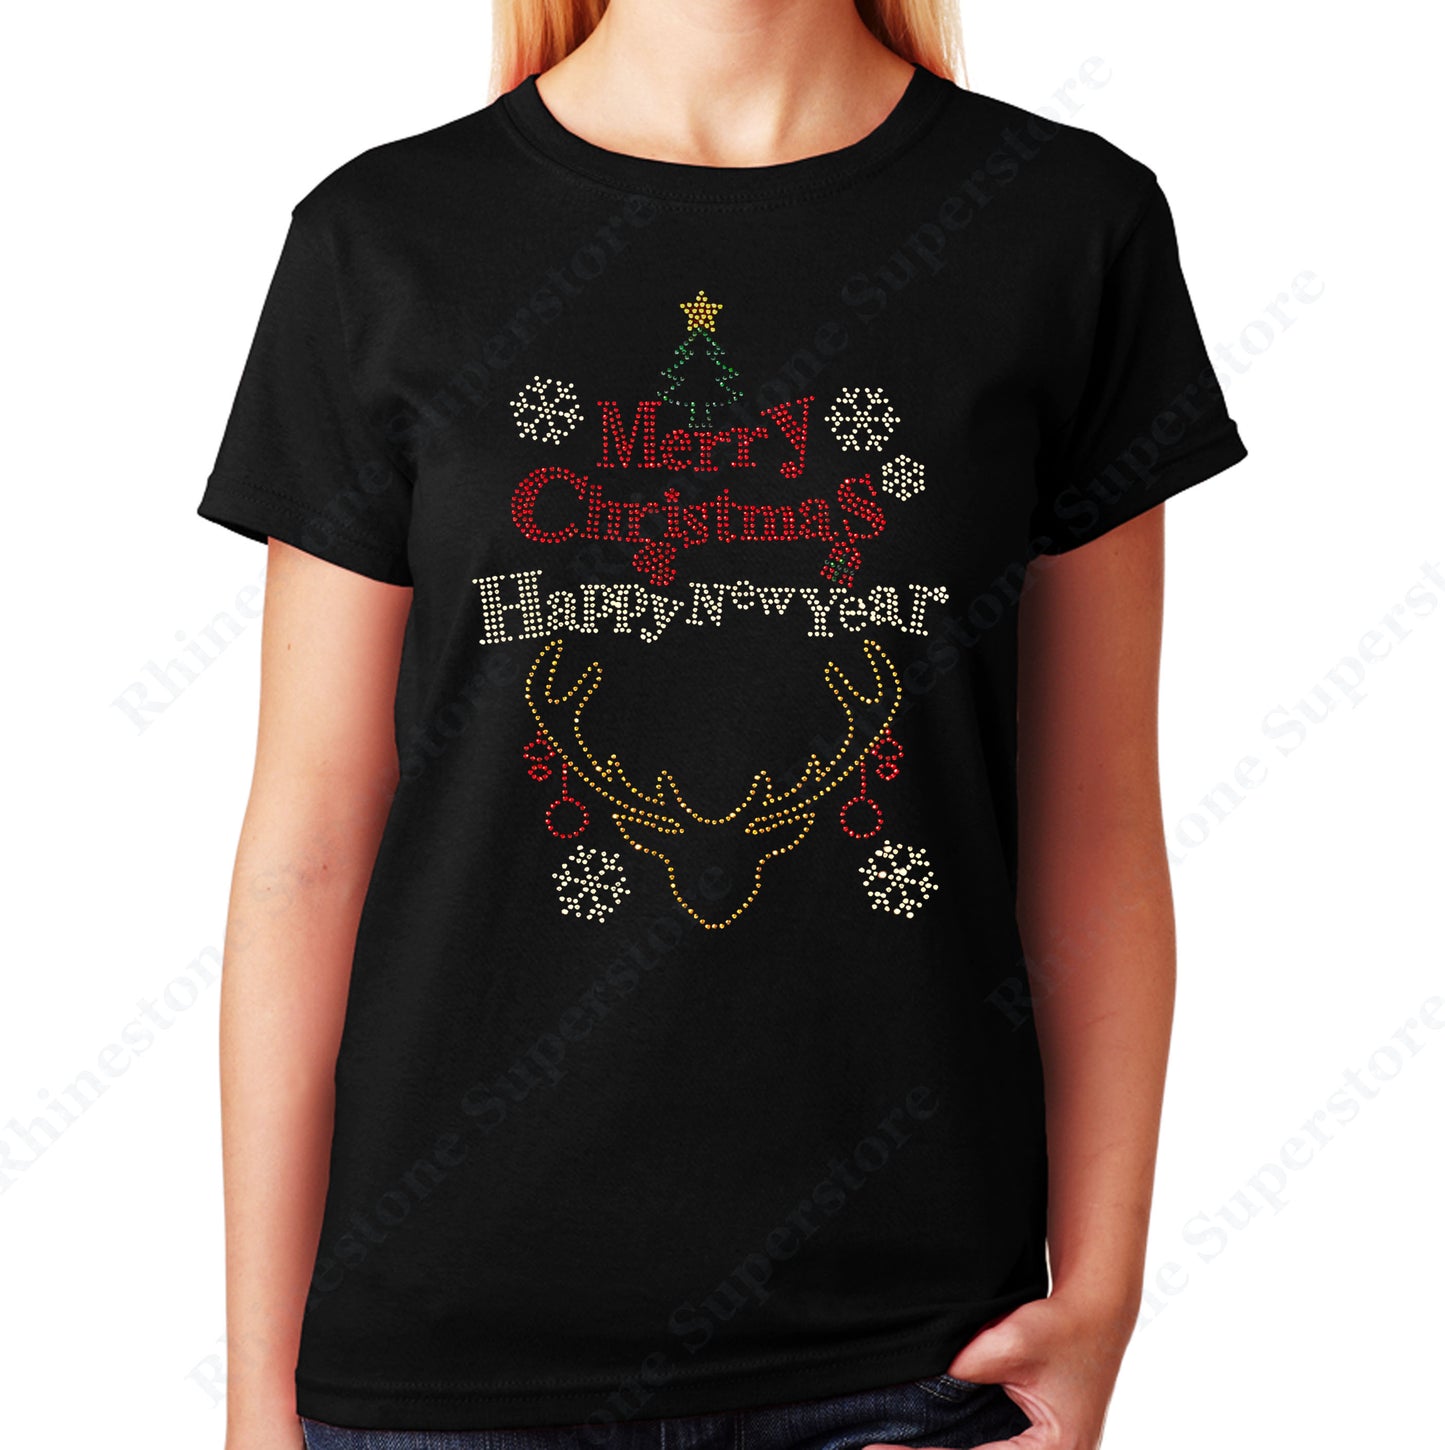 Unisex T-Shirt with Merry Christmas and Happy New Year in Rhinestones